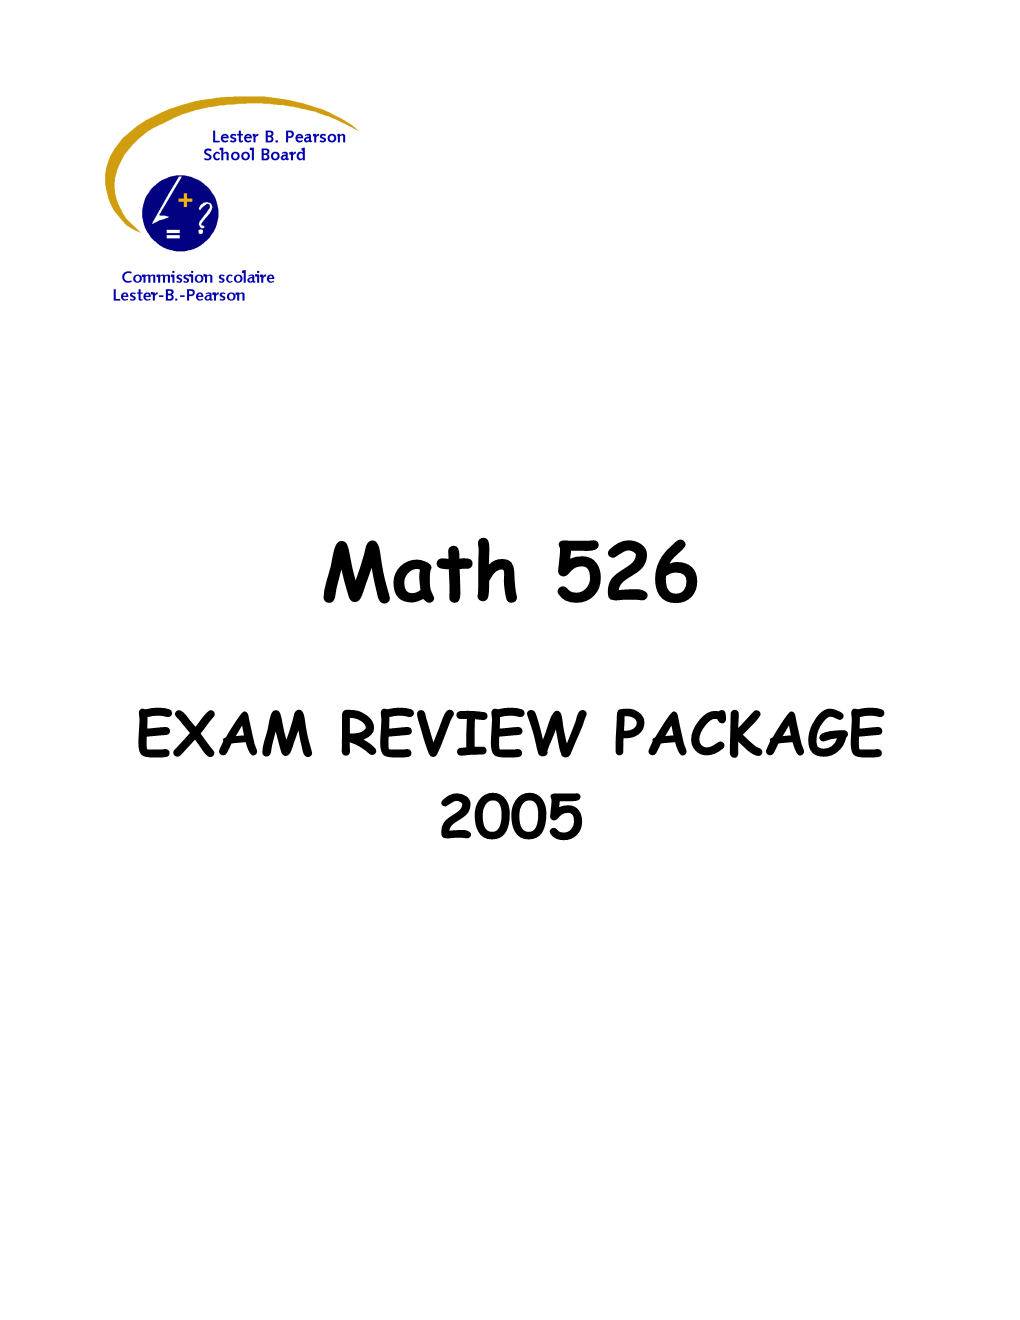 Exam Review Package